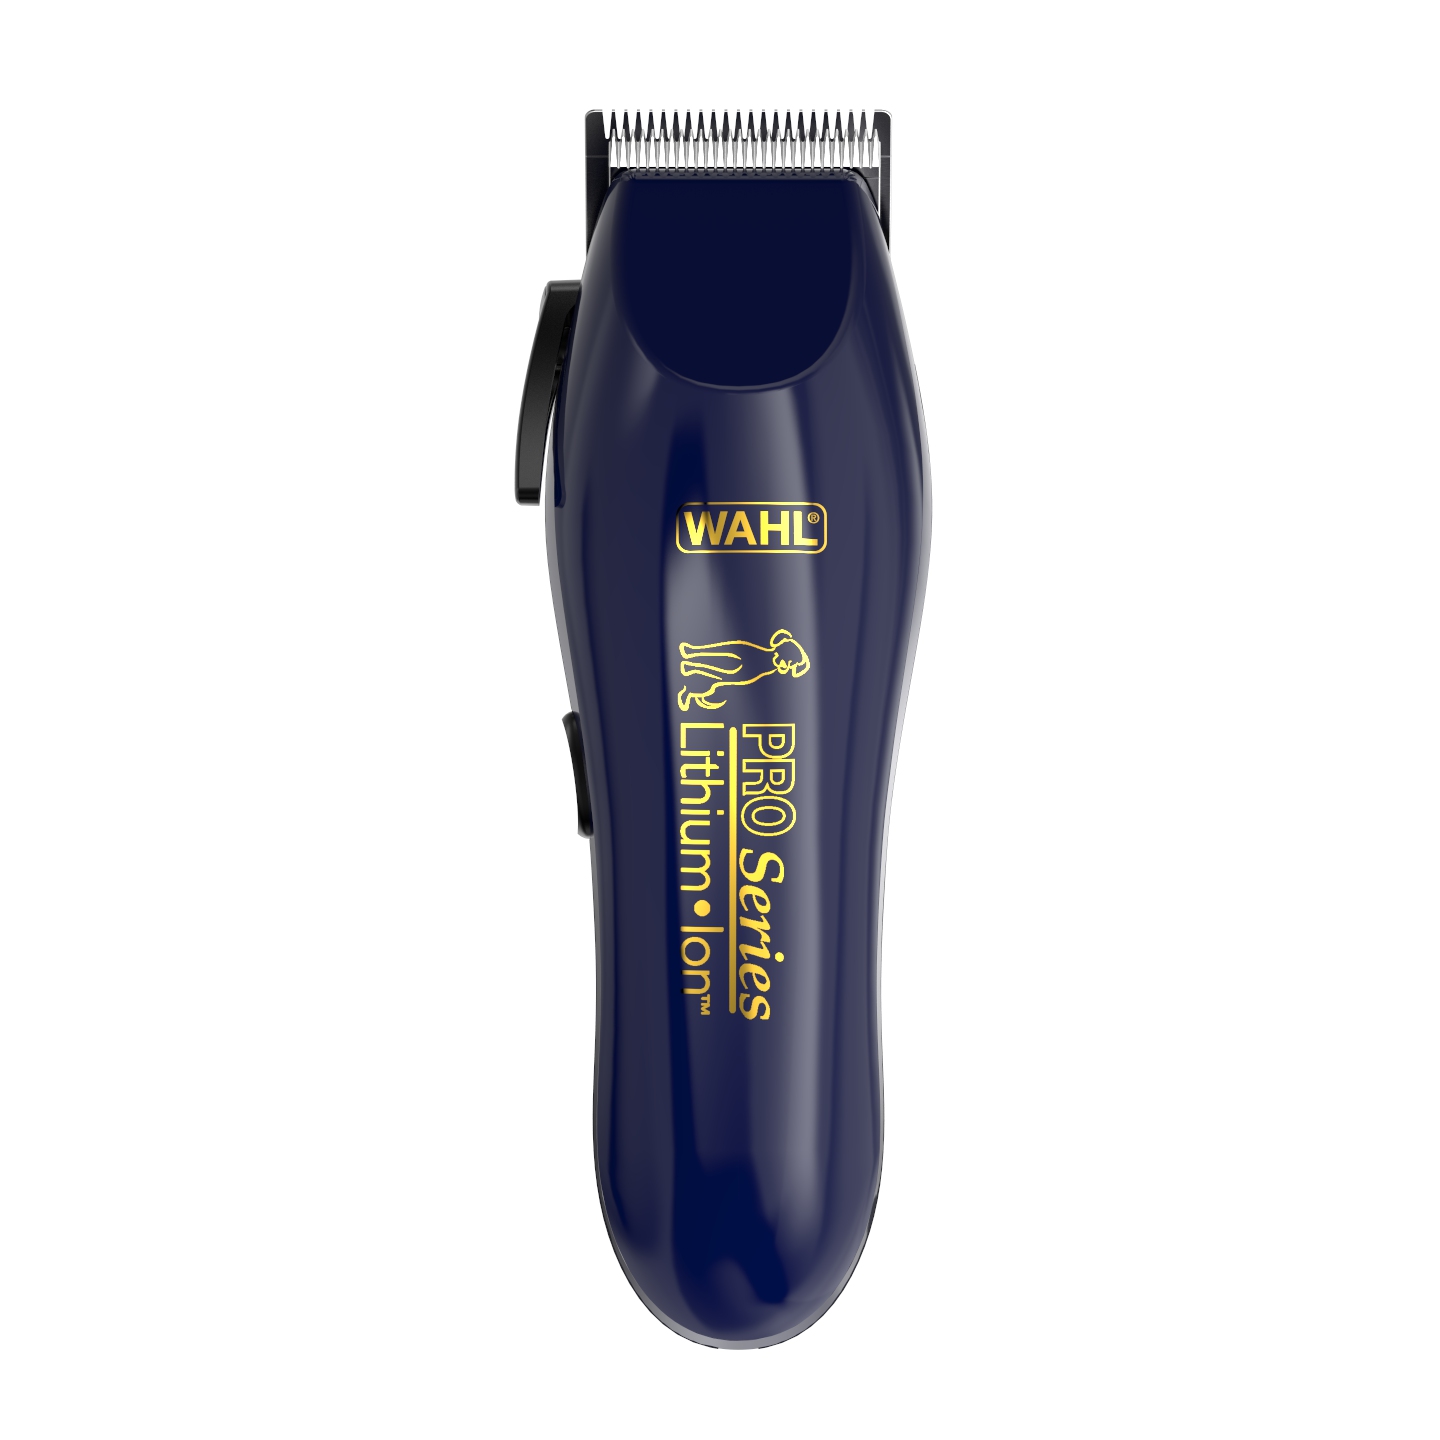 wahl hair clippers lithium pro